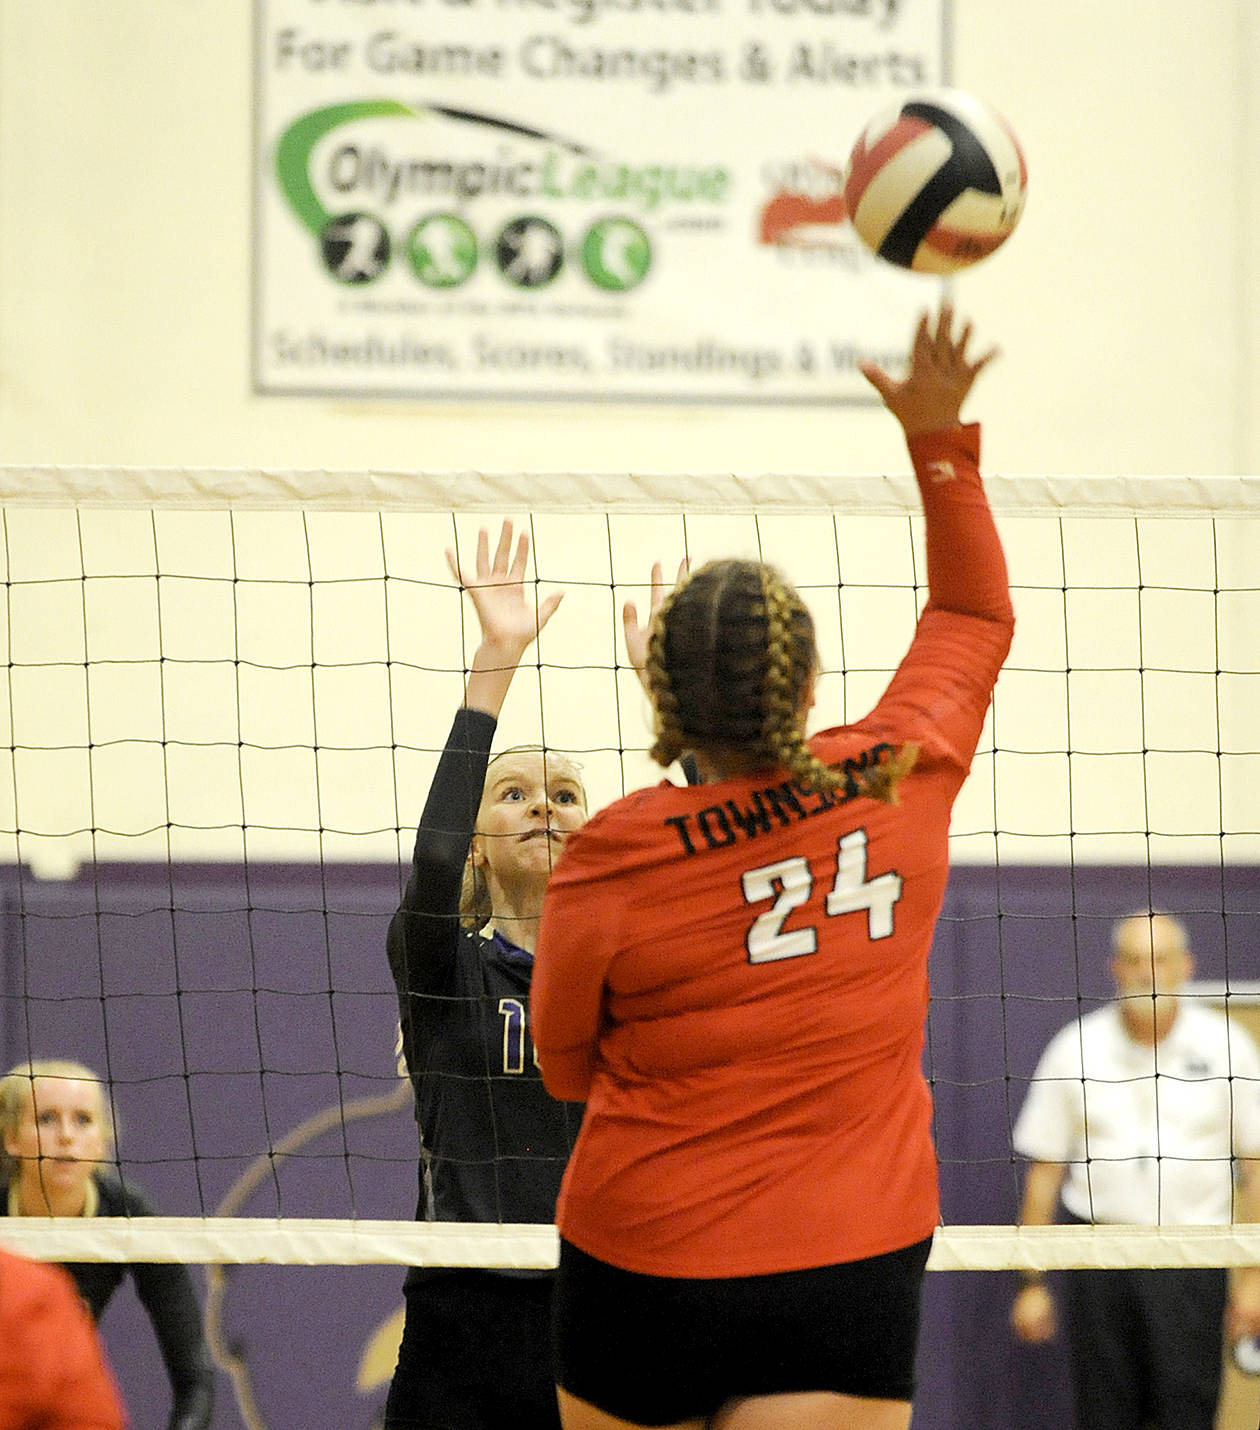 Port Townsend senior Tori Minnihan (24) looks for a big hit as Sequim freshman Kendall Hastings vies for a block in the opening match of Sequim’s volleyball jamboree Monday. Sequim swept the Redhawks in three games. The jamboree saw round-robin play between Sequim, Port Angeles and Port Townsend.